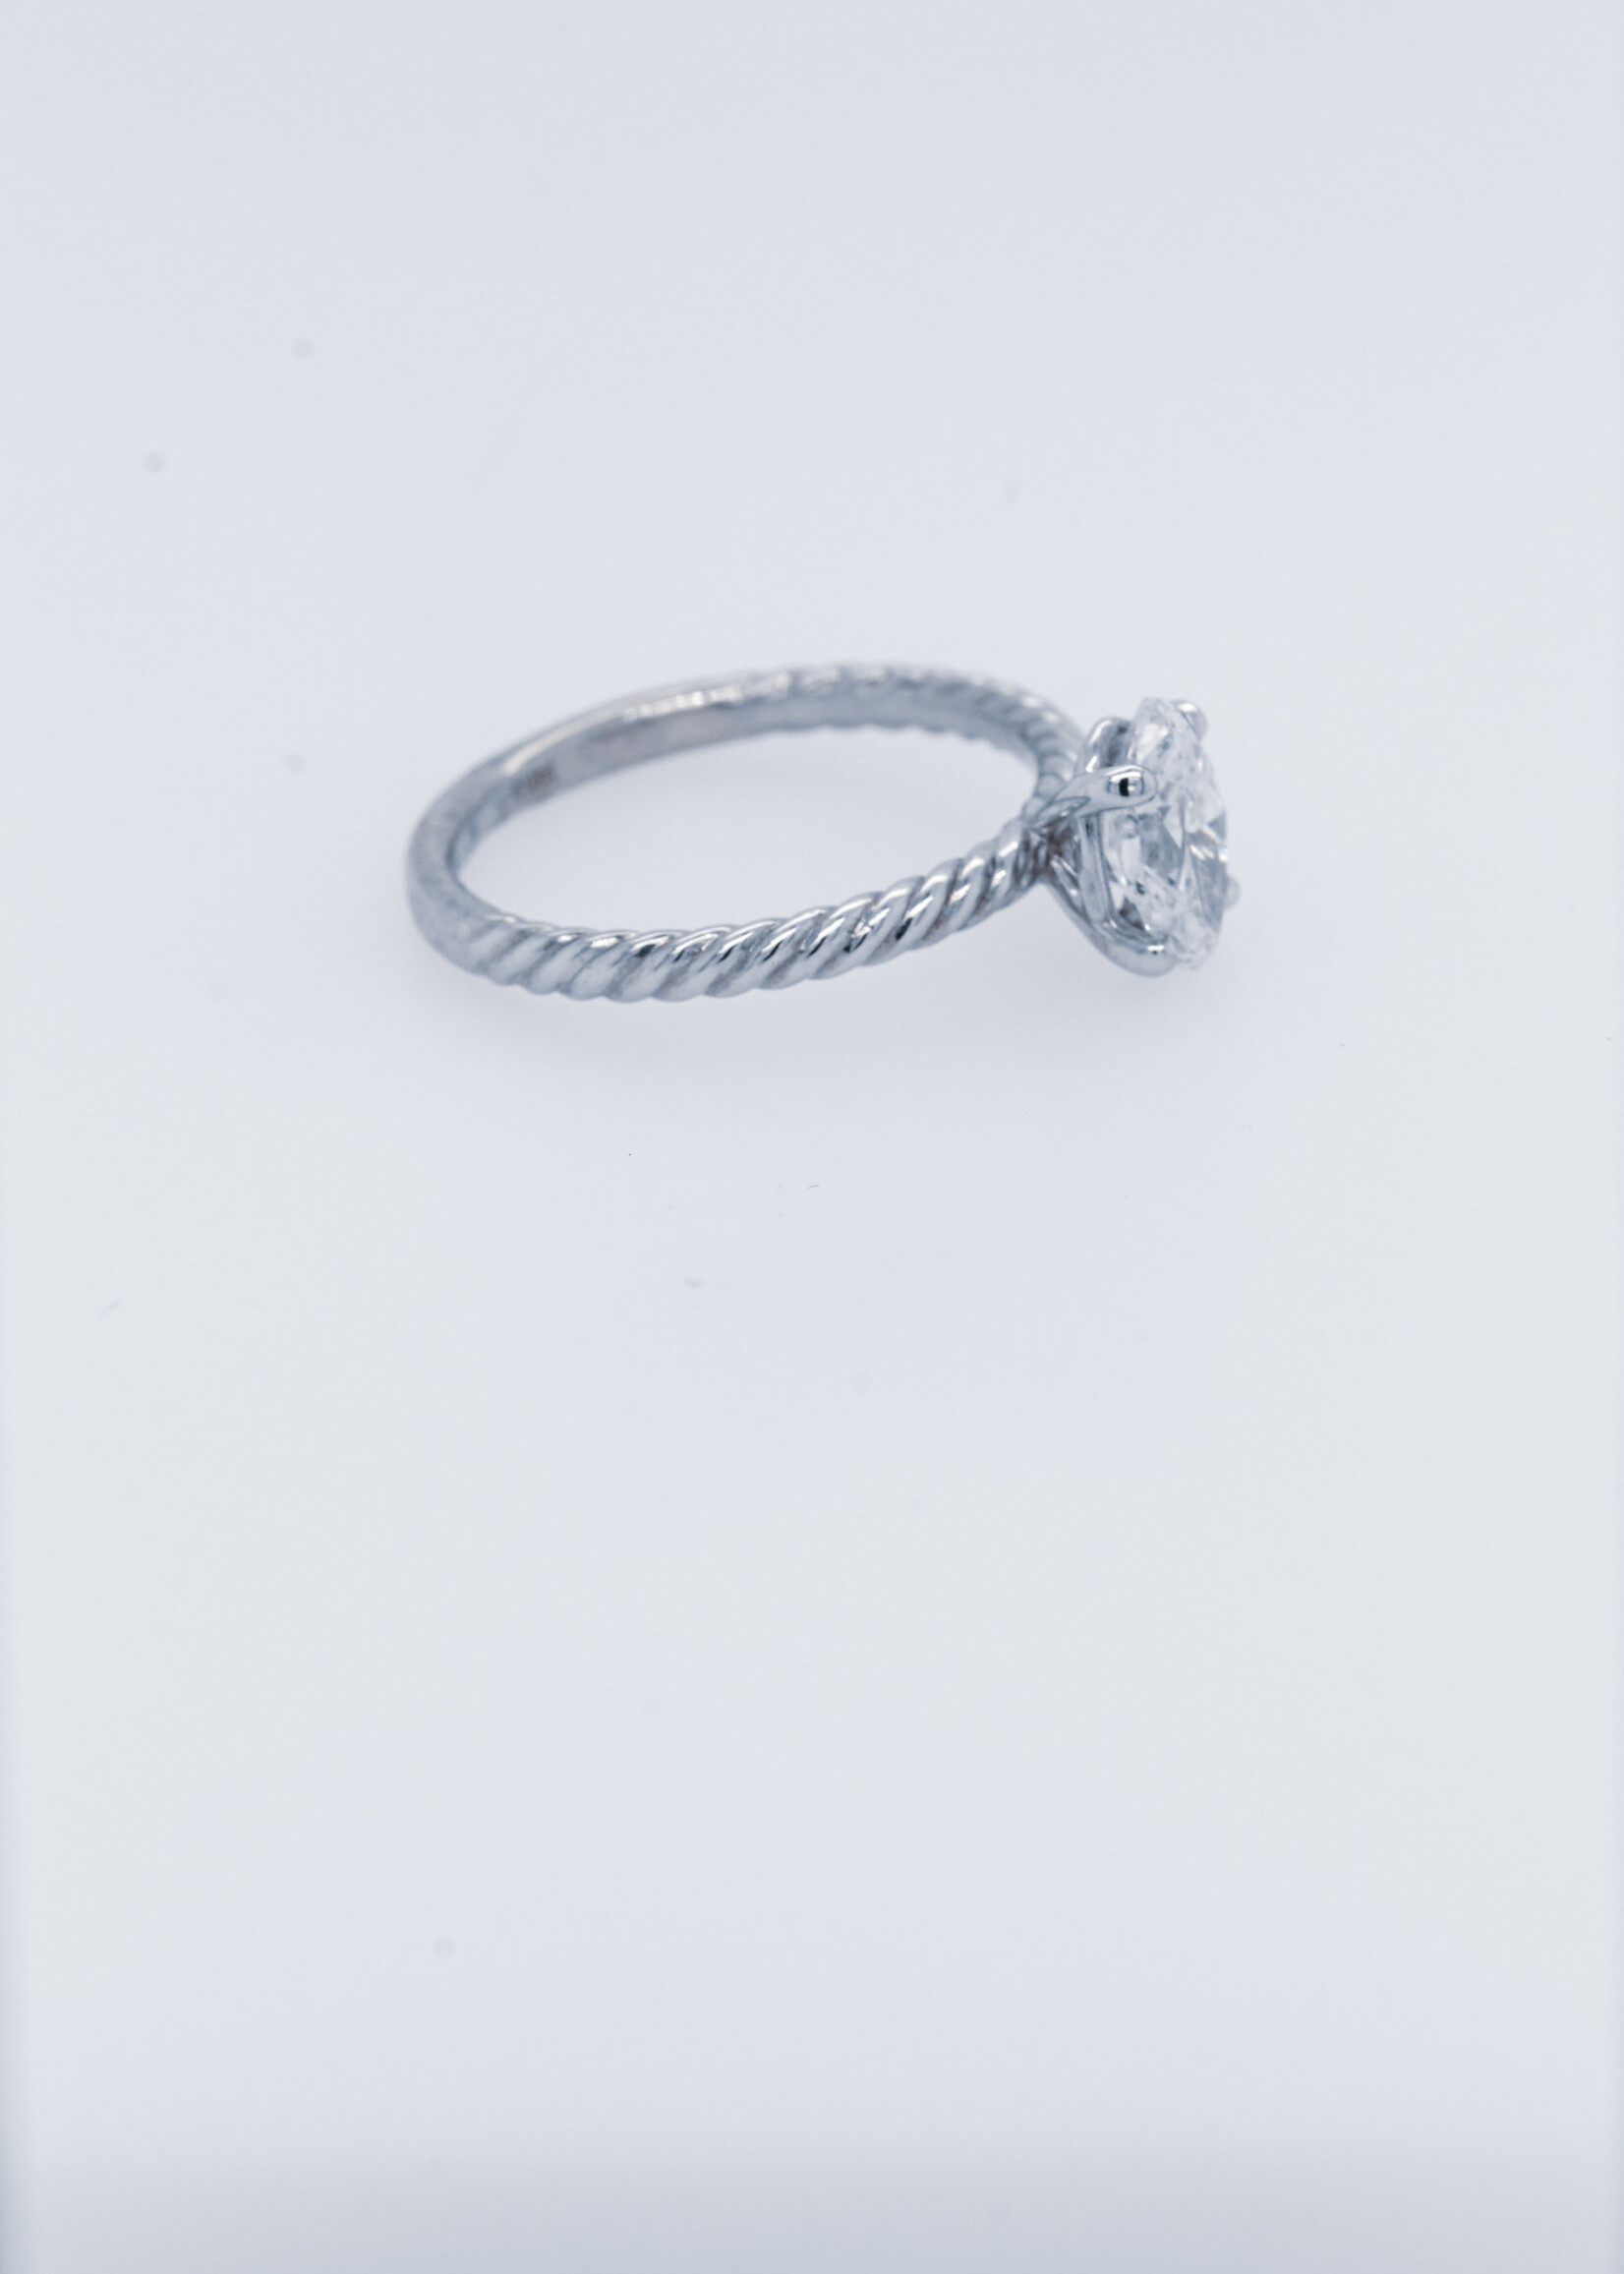 14KW 2.00g 1.02ct E/I1 Moval Cut Diamond Twist Solitaire Ring (size 7)